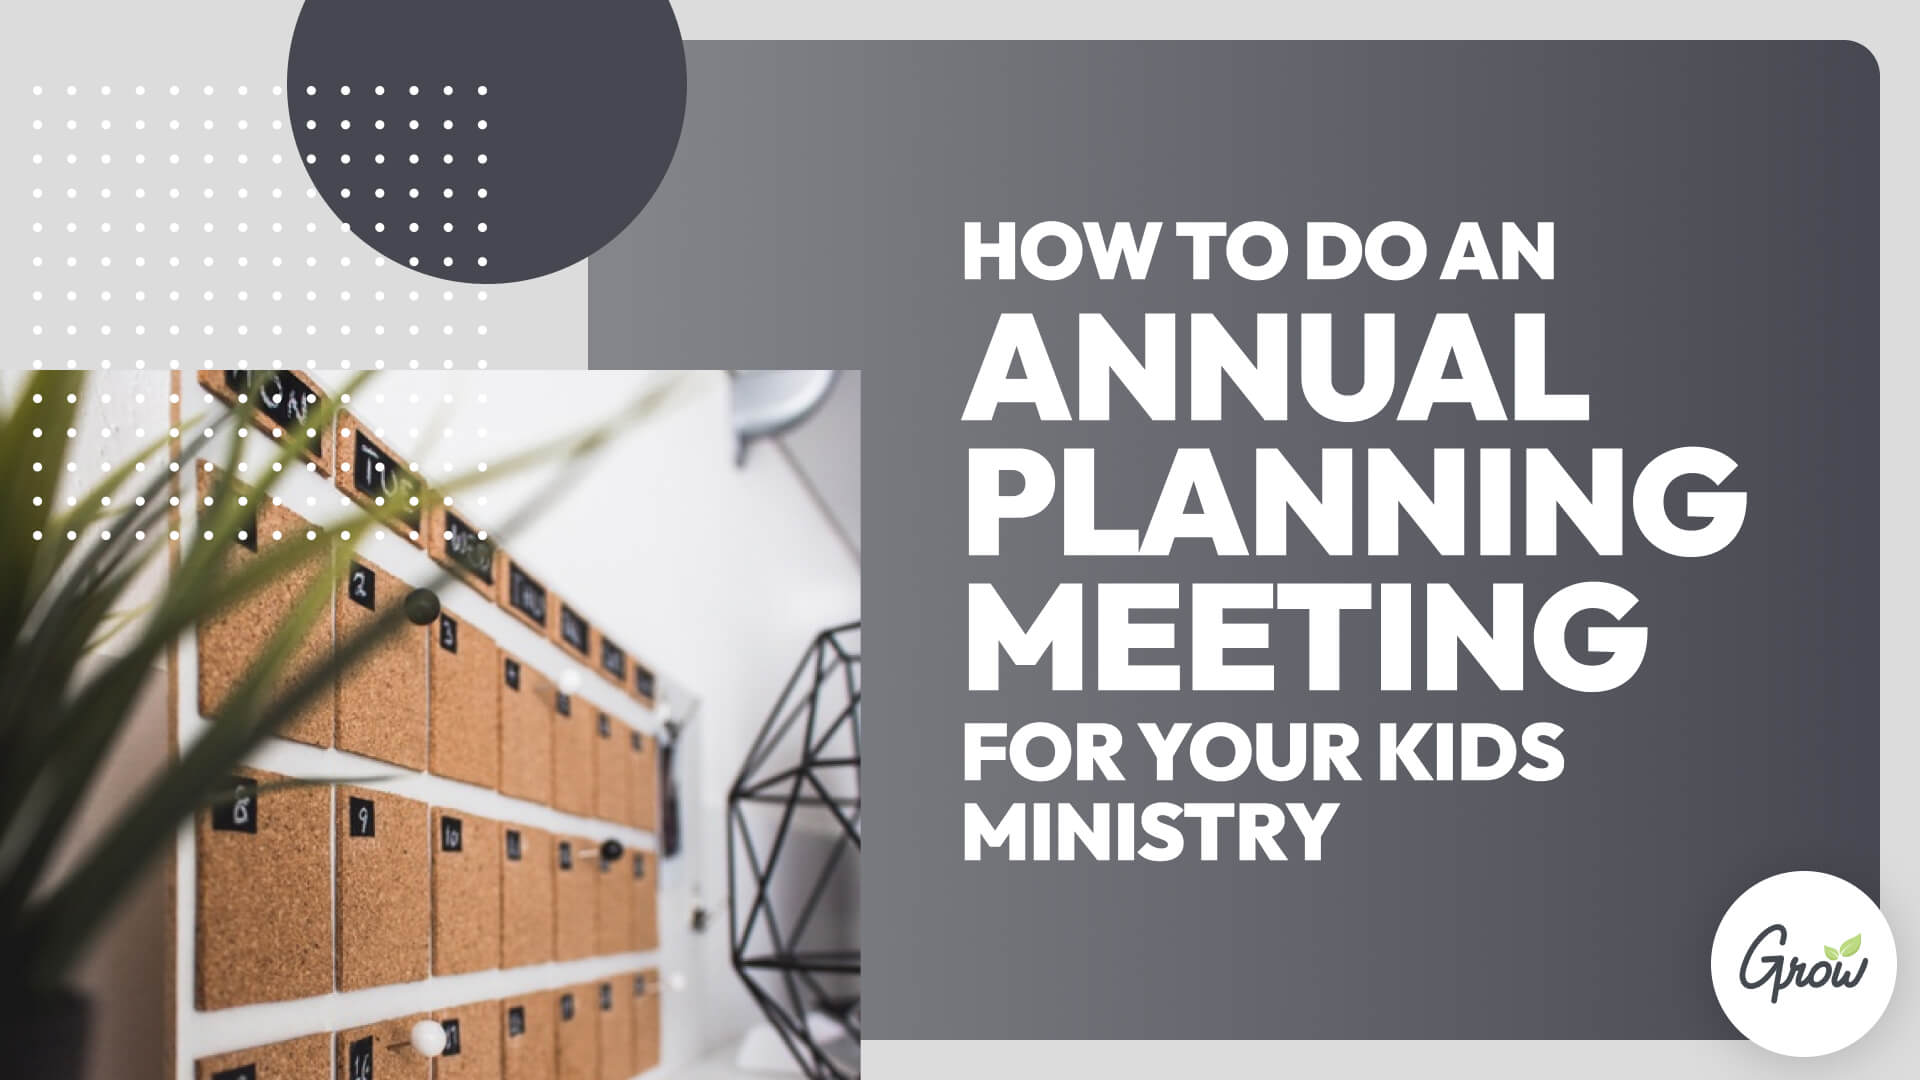 How to Do an Annual Planning Meeting for Your Kids Ministry